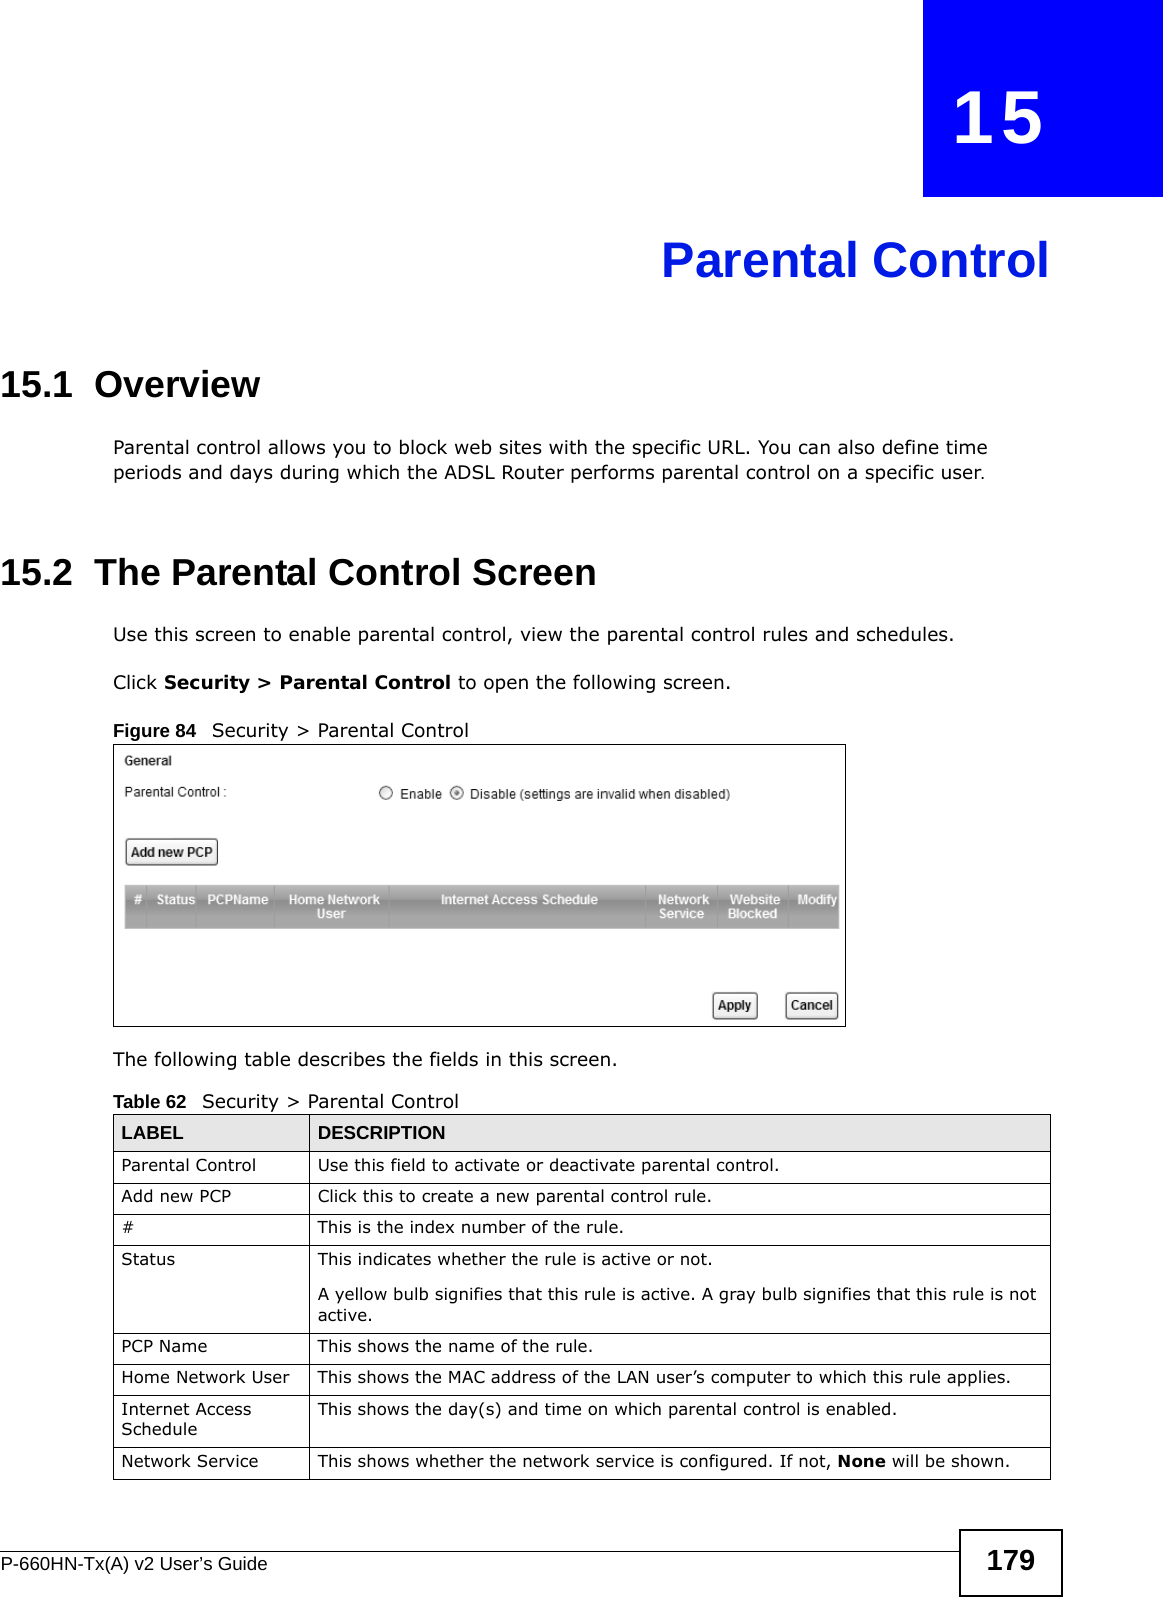 P-660HN-Tx(A) v2 User’s Guide 179CHAPTER   15Parental Control15.1  OverviewParental control allows you to block web sites with the specific URL. You can also define time periods and days during which the ADSL Router performs parental control on a specific user.15.2  The Parental Control ScreenUse this screen to enable parental control, view the parental control rules and schedules.Click Security &gt; Parental Control to open the following screen. Figure 84   Security &gt; Parental Control  The following table describes the fields in this screen. Table 62   Security &gt; Parental ControlLABEL DESCRIPTIONParental Control Use this field to activate or deactivate parental control.Add new PCP Click this to create a new parental control rule.# This is the index number of the rule.Status This indicates whether the rule is active or not.A yellow bulb signifies that this rule is active. A gray bulb signifies that this rule is not active.PCP Name This shows the name of the rule.Home Network User This shows the MAC address of the LAN user’s computer to which this rule applies.Internet Access ScheduleThis shows the day(s) and time on which parental control is enabled.Network Service This shows whether the network service is configured. If not, None will be shown.